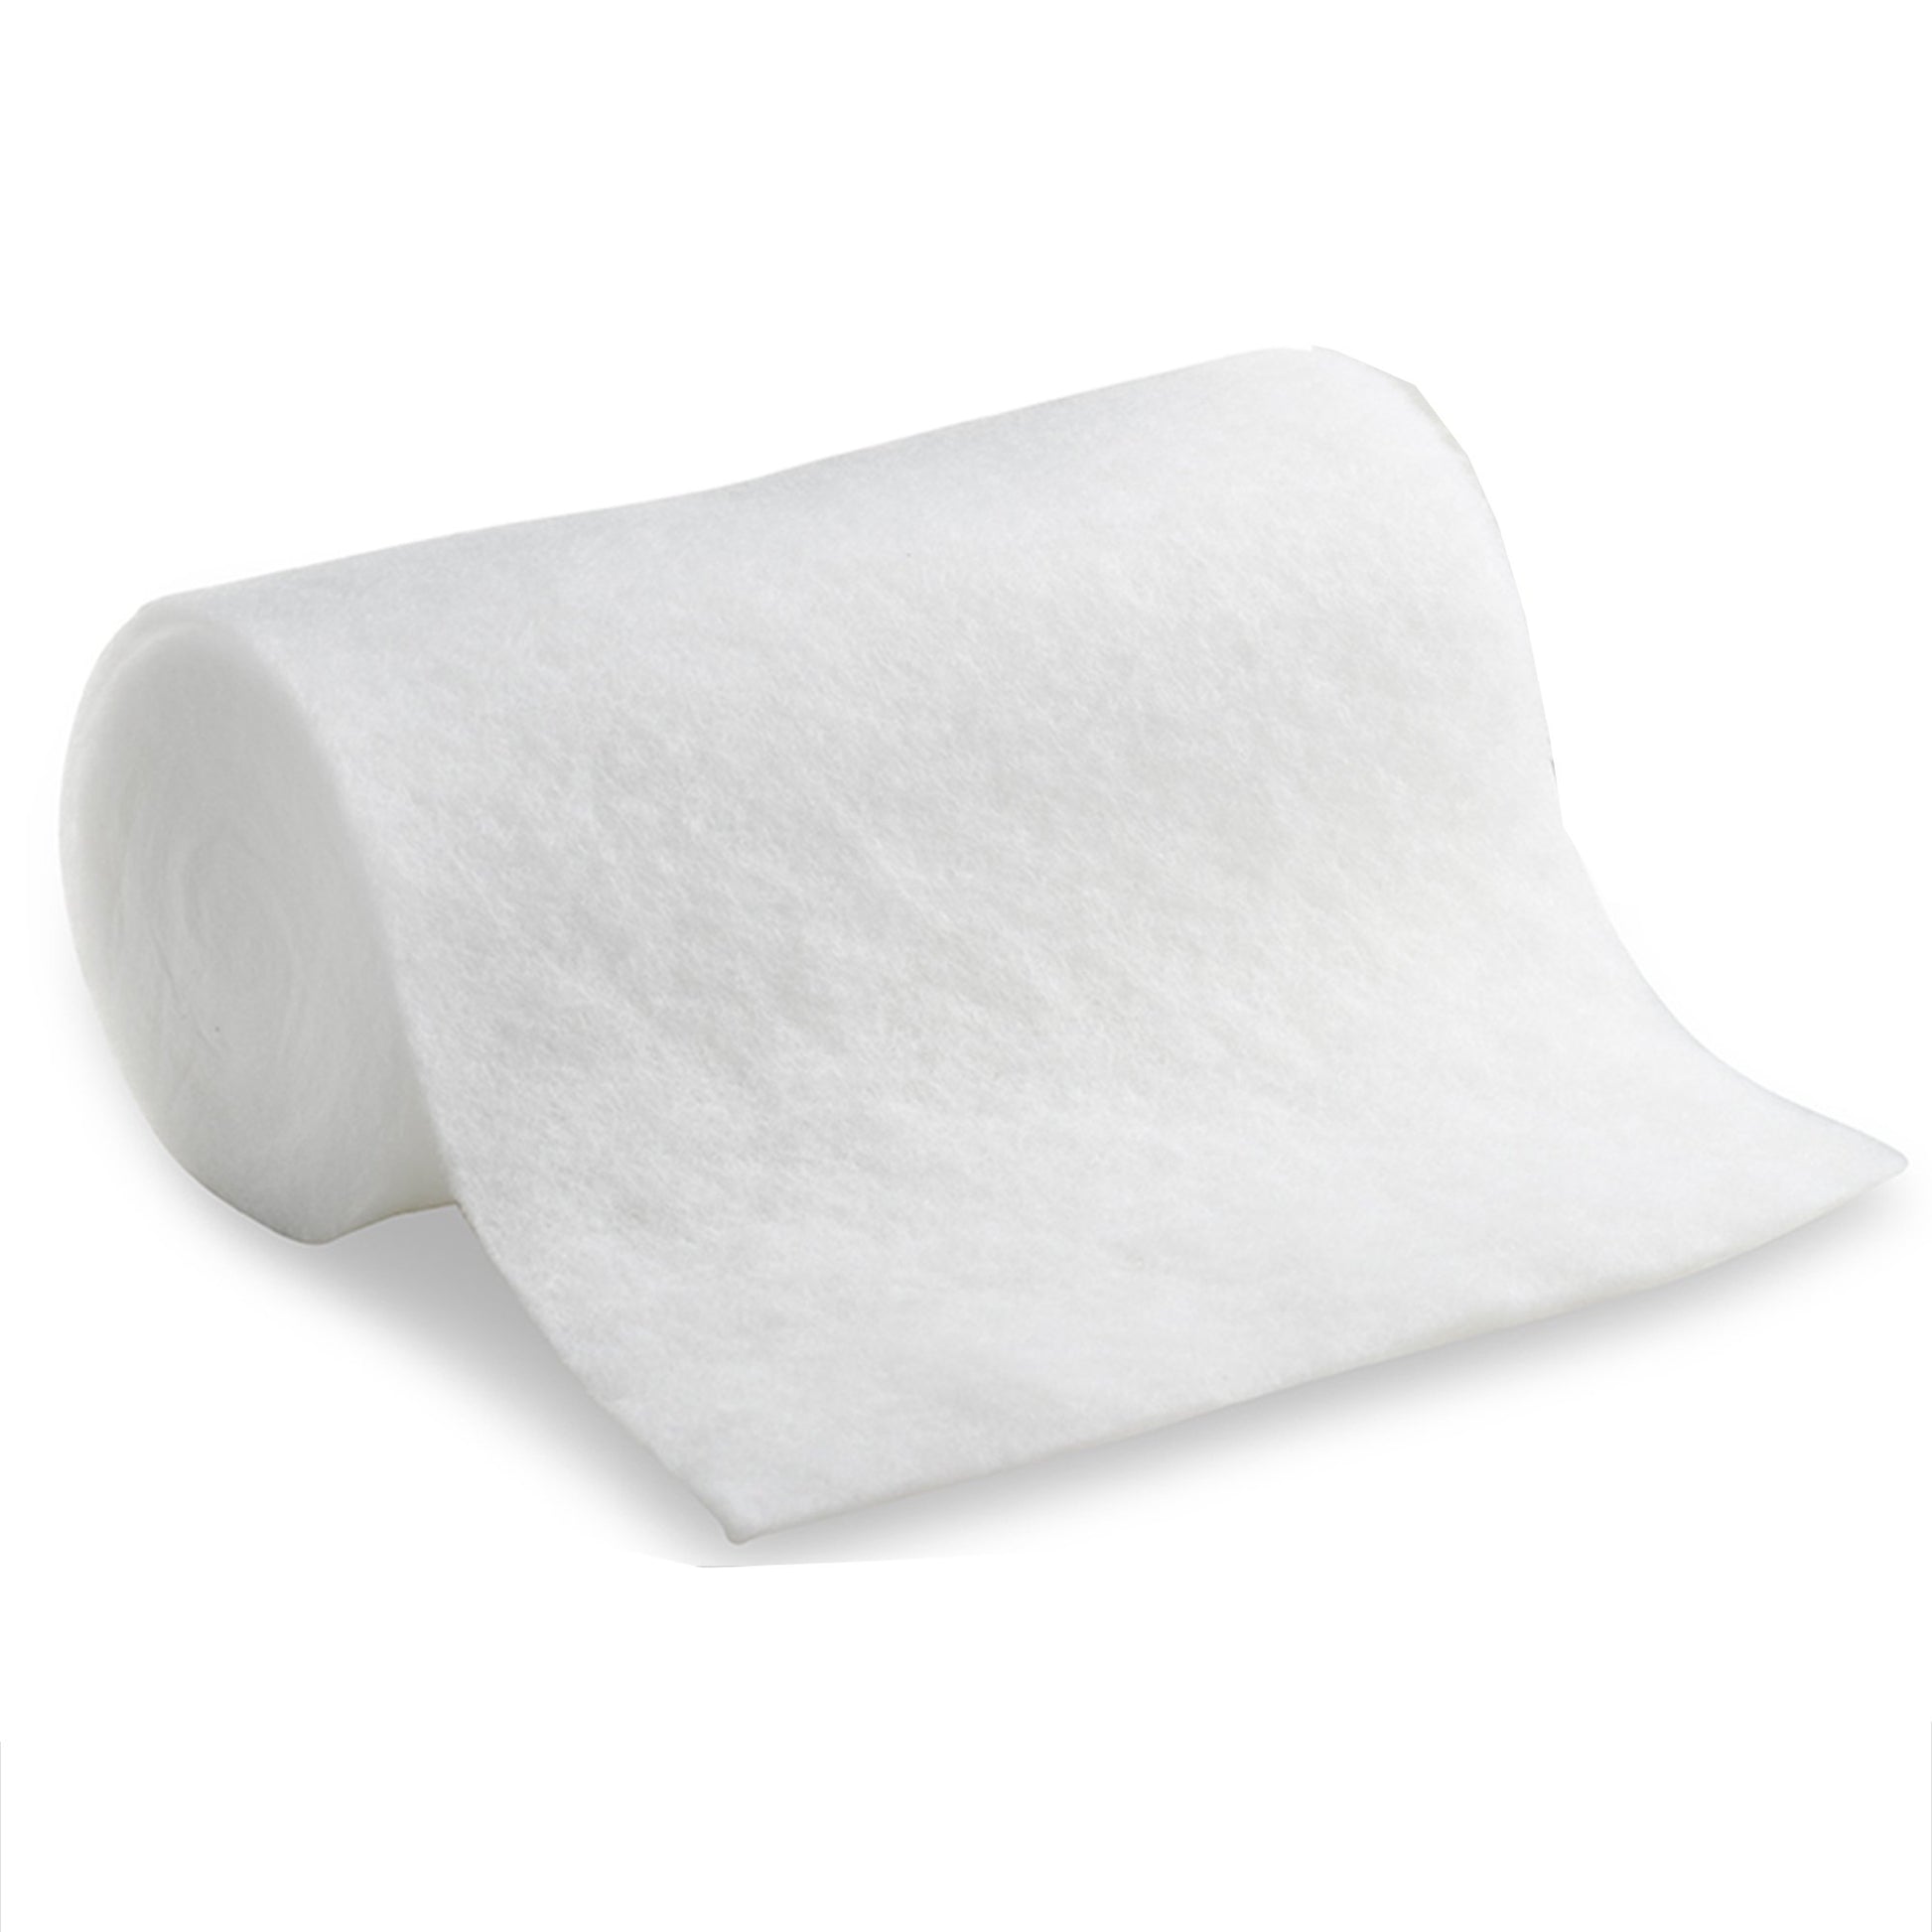 3M™ White Polyester Undercast Cast Padding, 6 Inch X 4 Yard, Sold As 80/Case 3M Cmw06